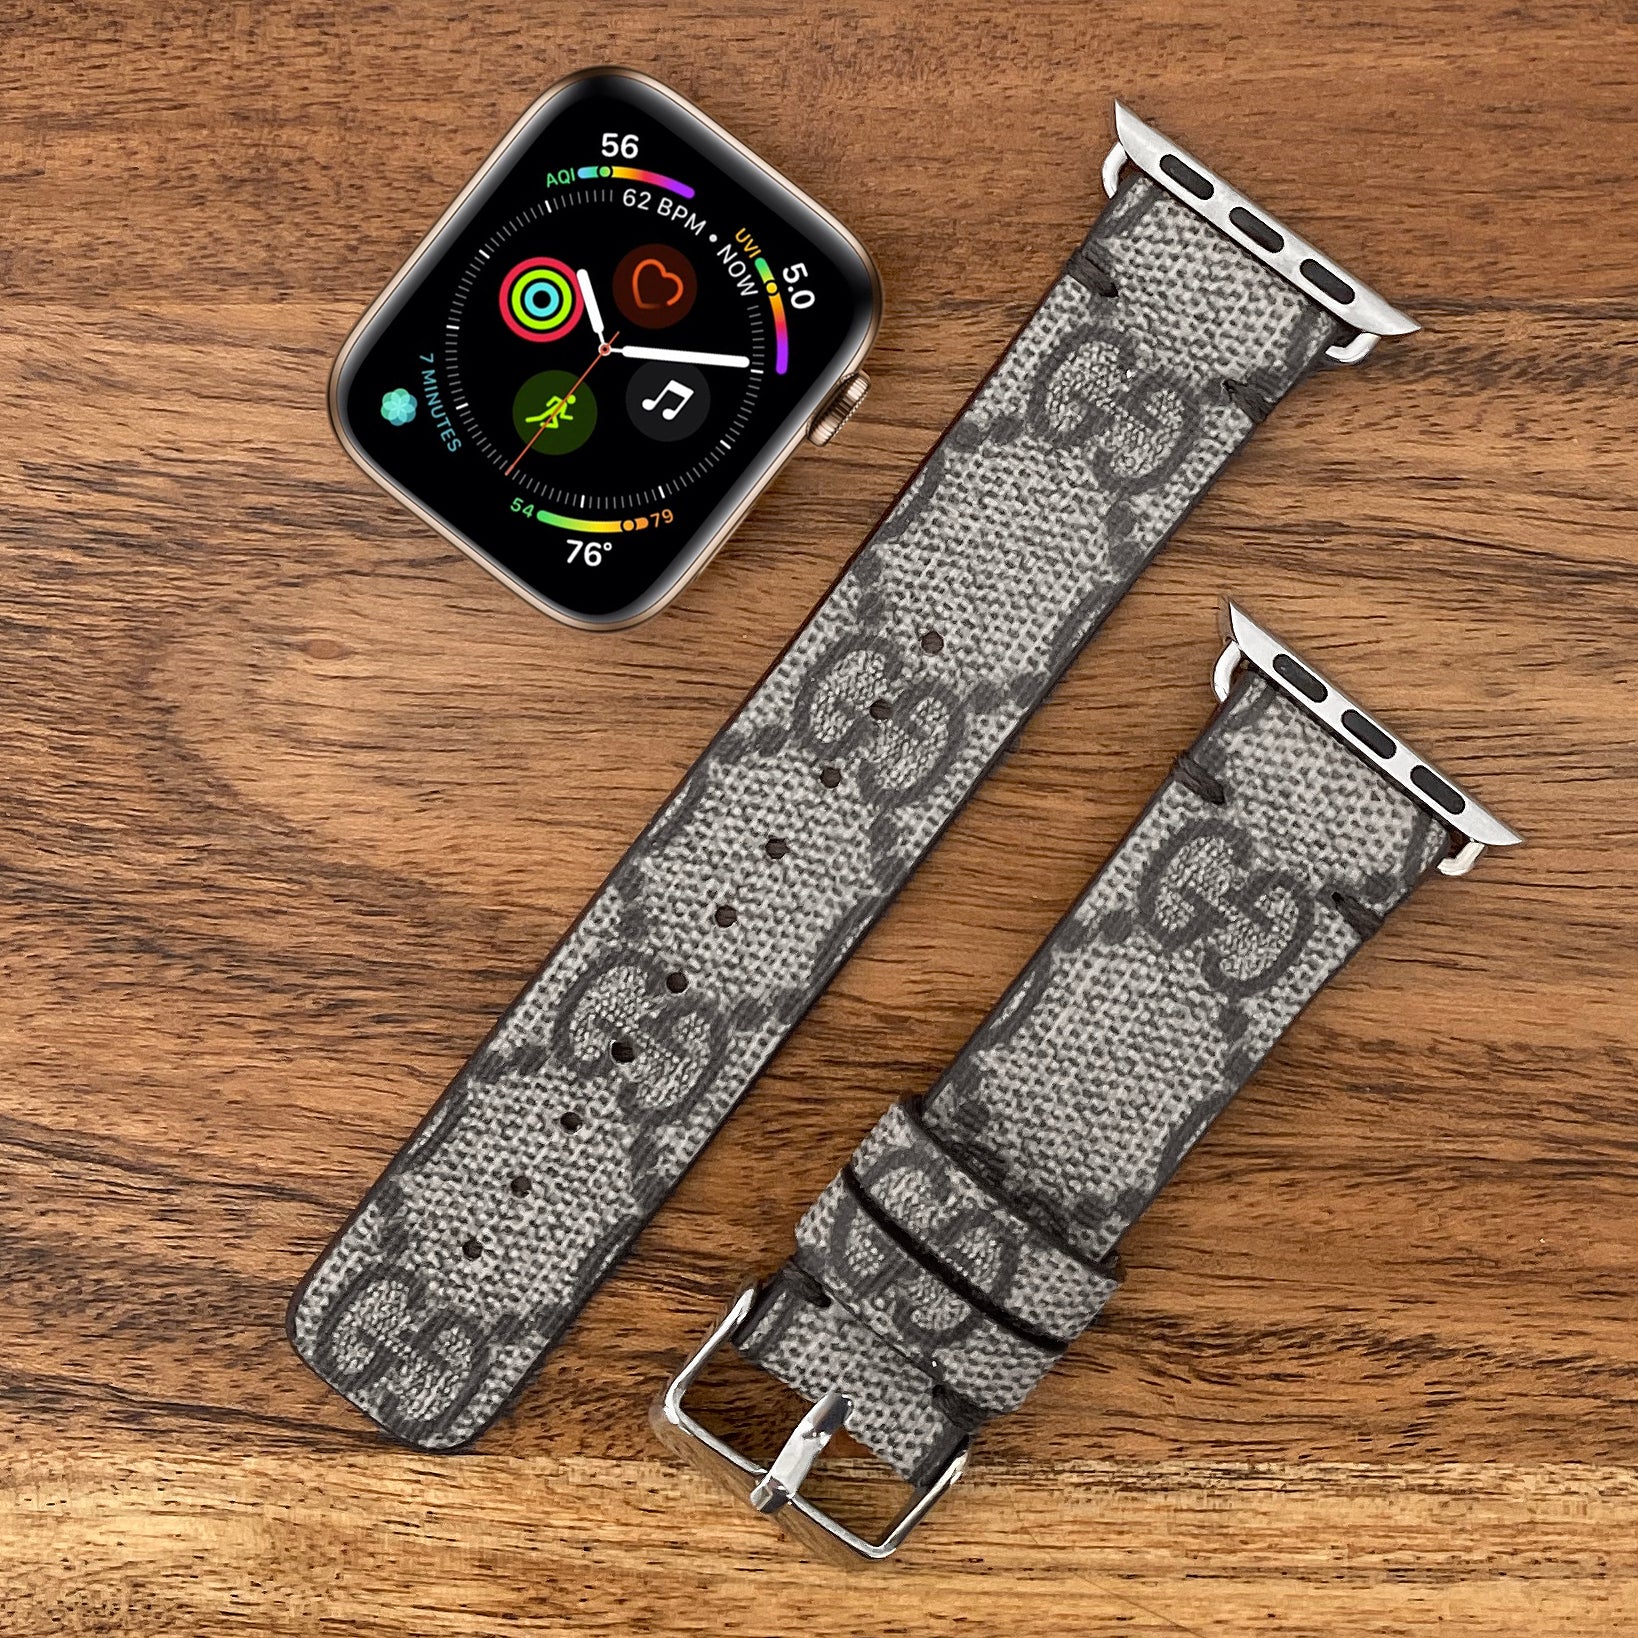 ART]LV Handmade Apple Watch Band made from recycled Louis Vuitton bags :  r/streetwear